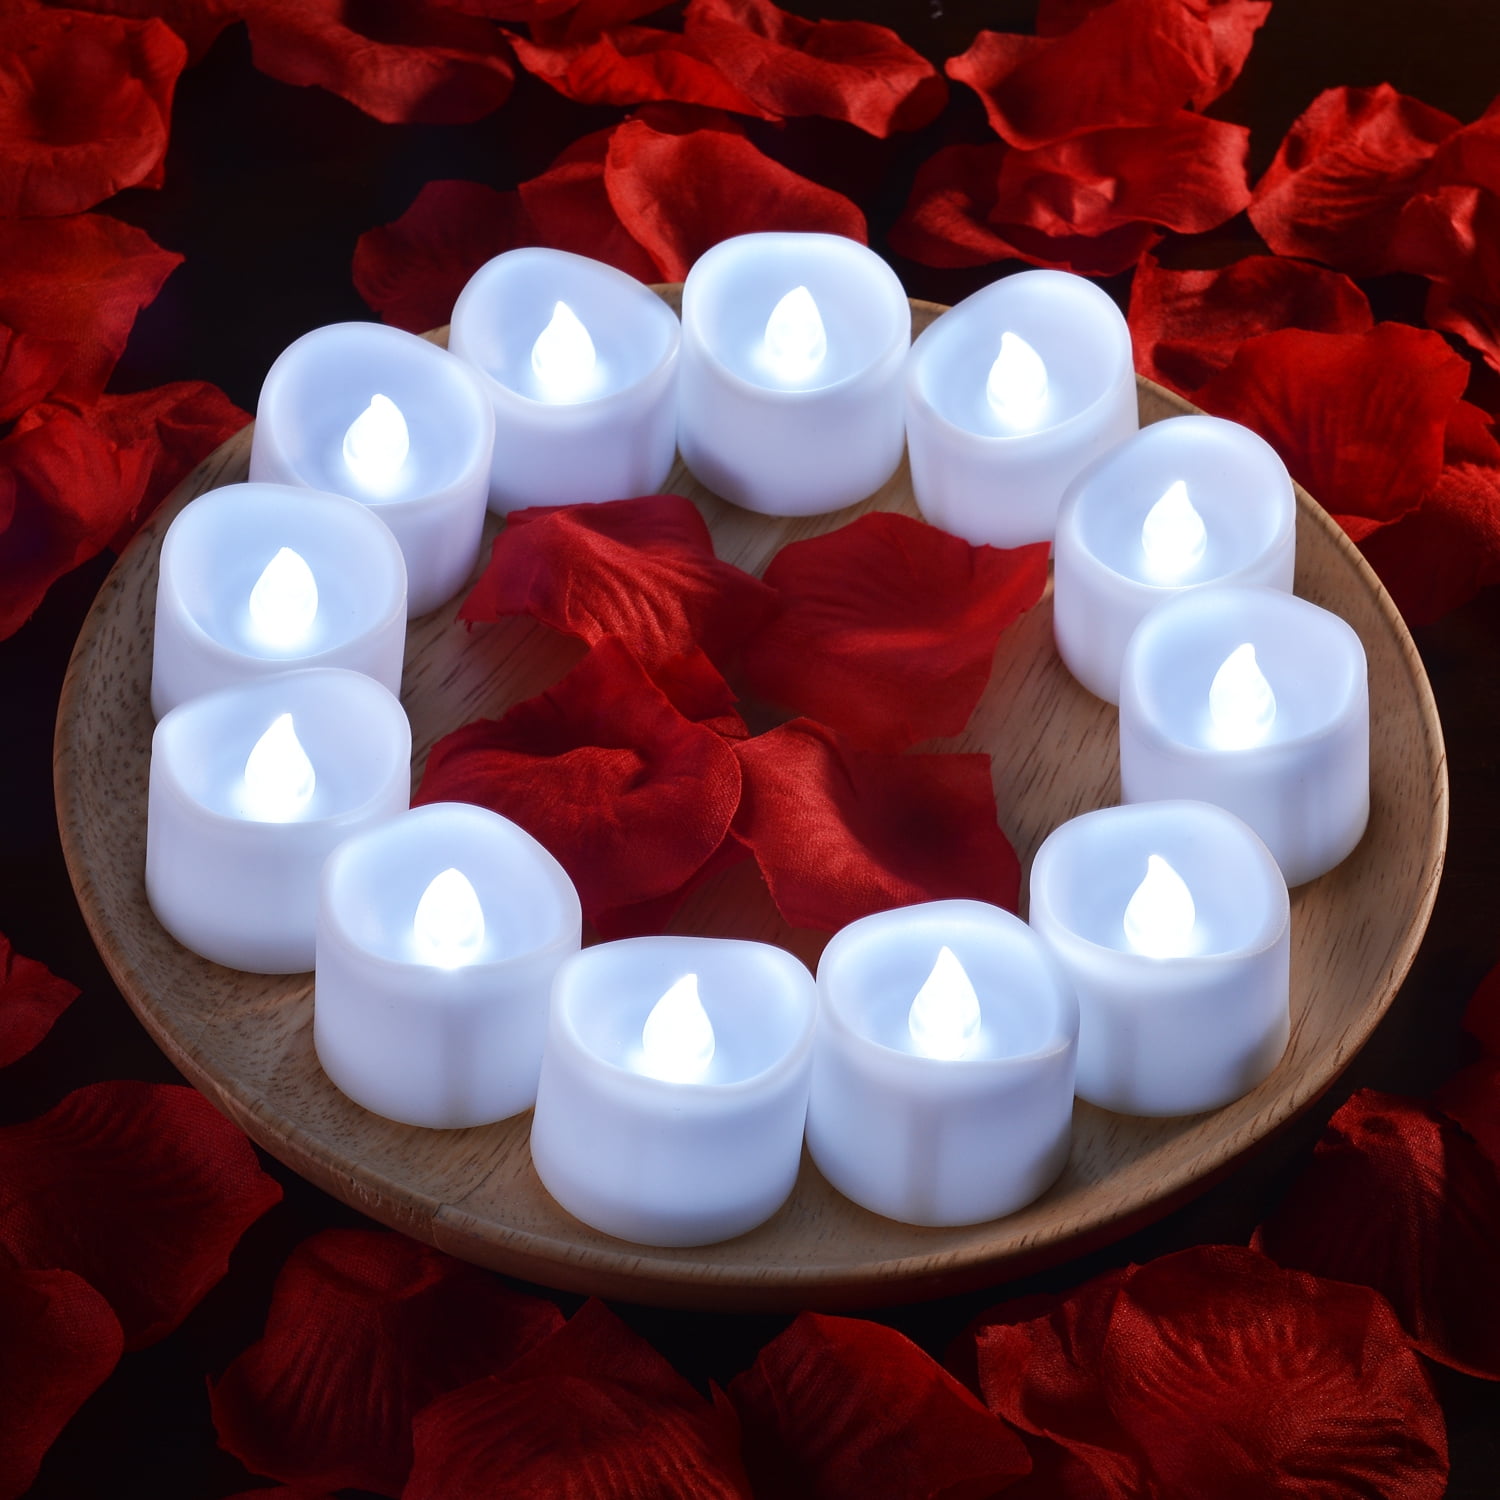 Homemory LED Candles and Valentine's Day 12pcs Battery Tea Lights with 100pcs Artificial Rose Petals Long Lasting LED Tea Lights Wedding Ideal for Propose 